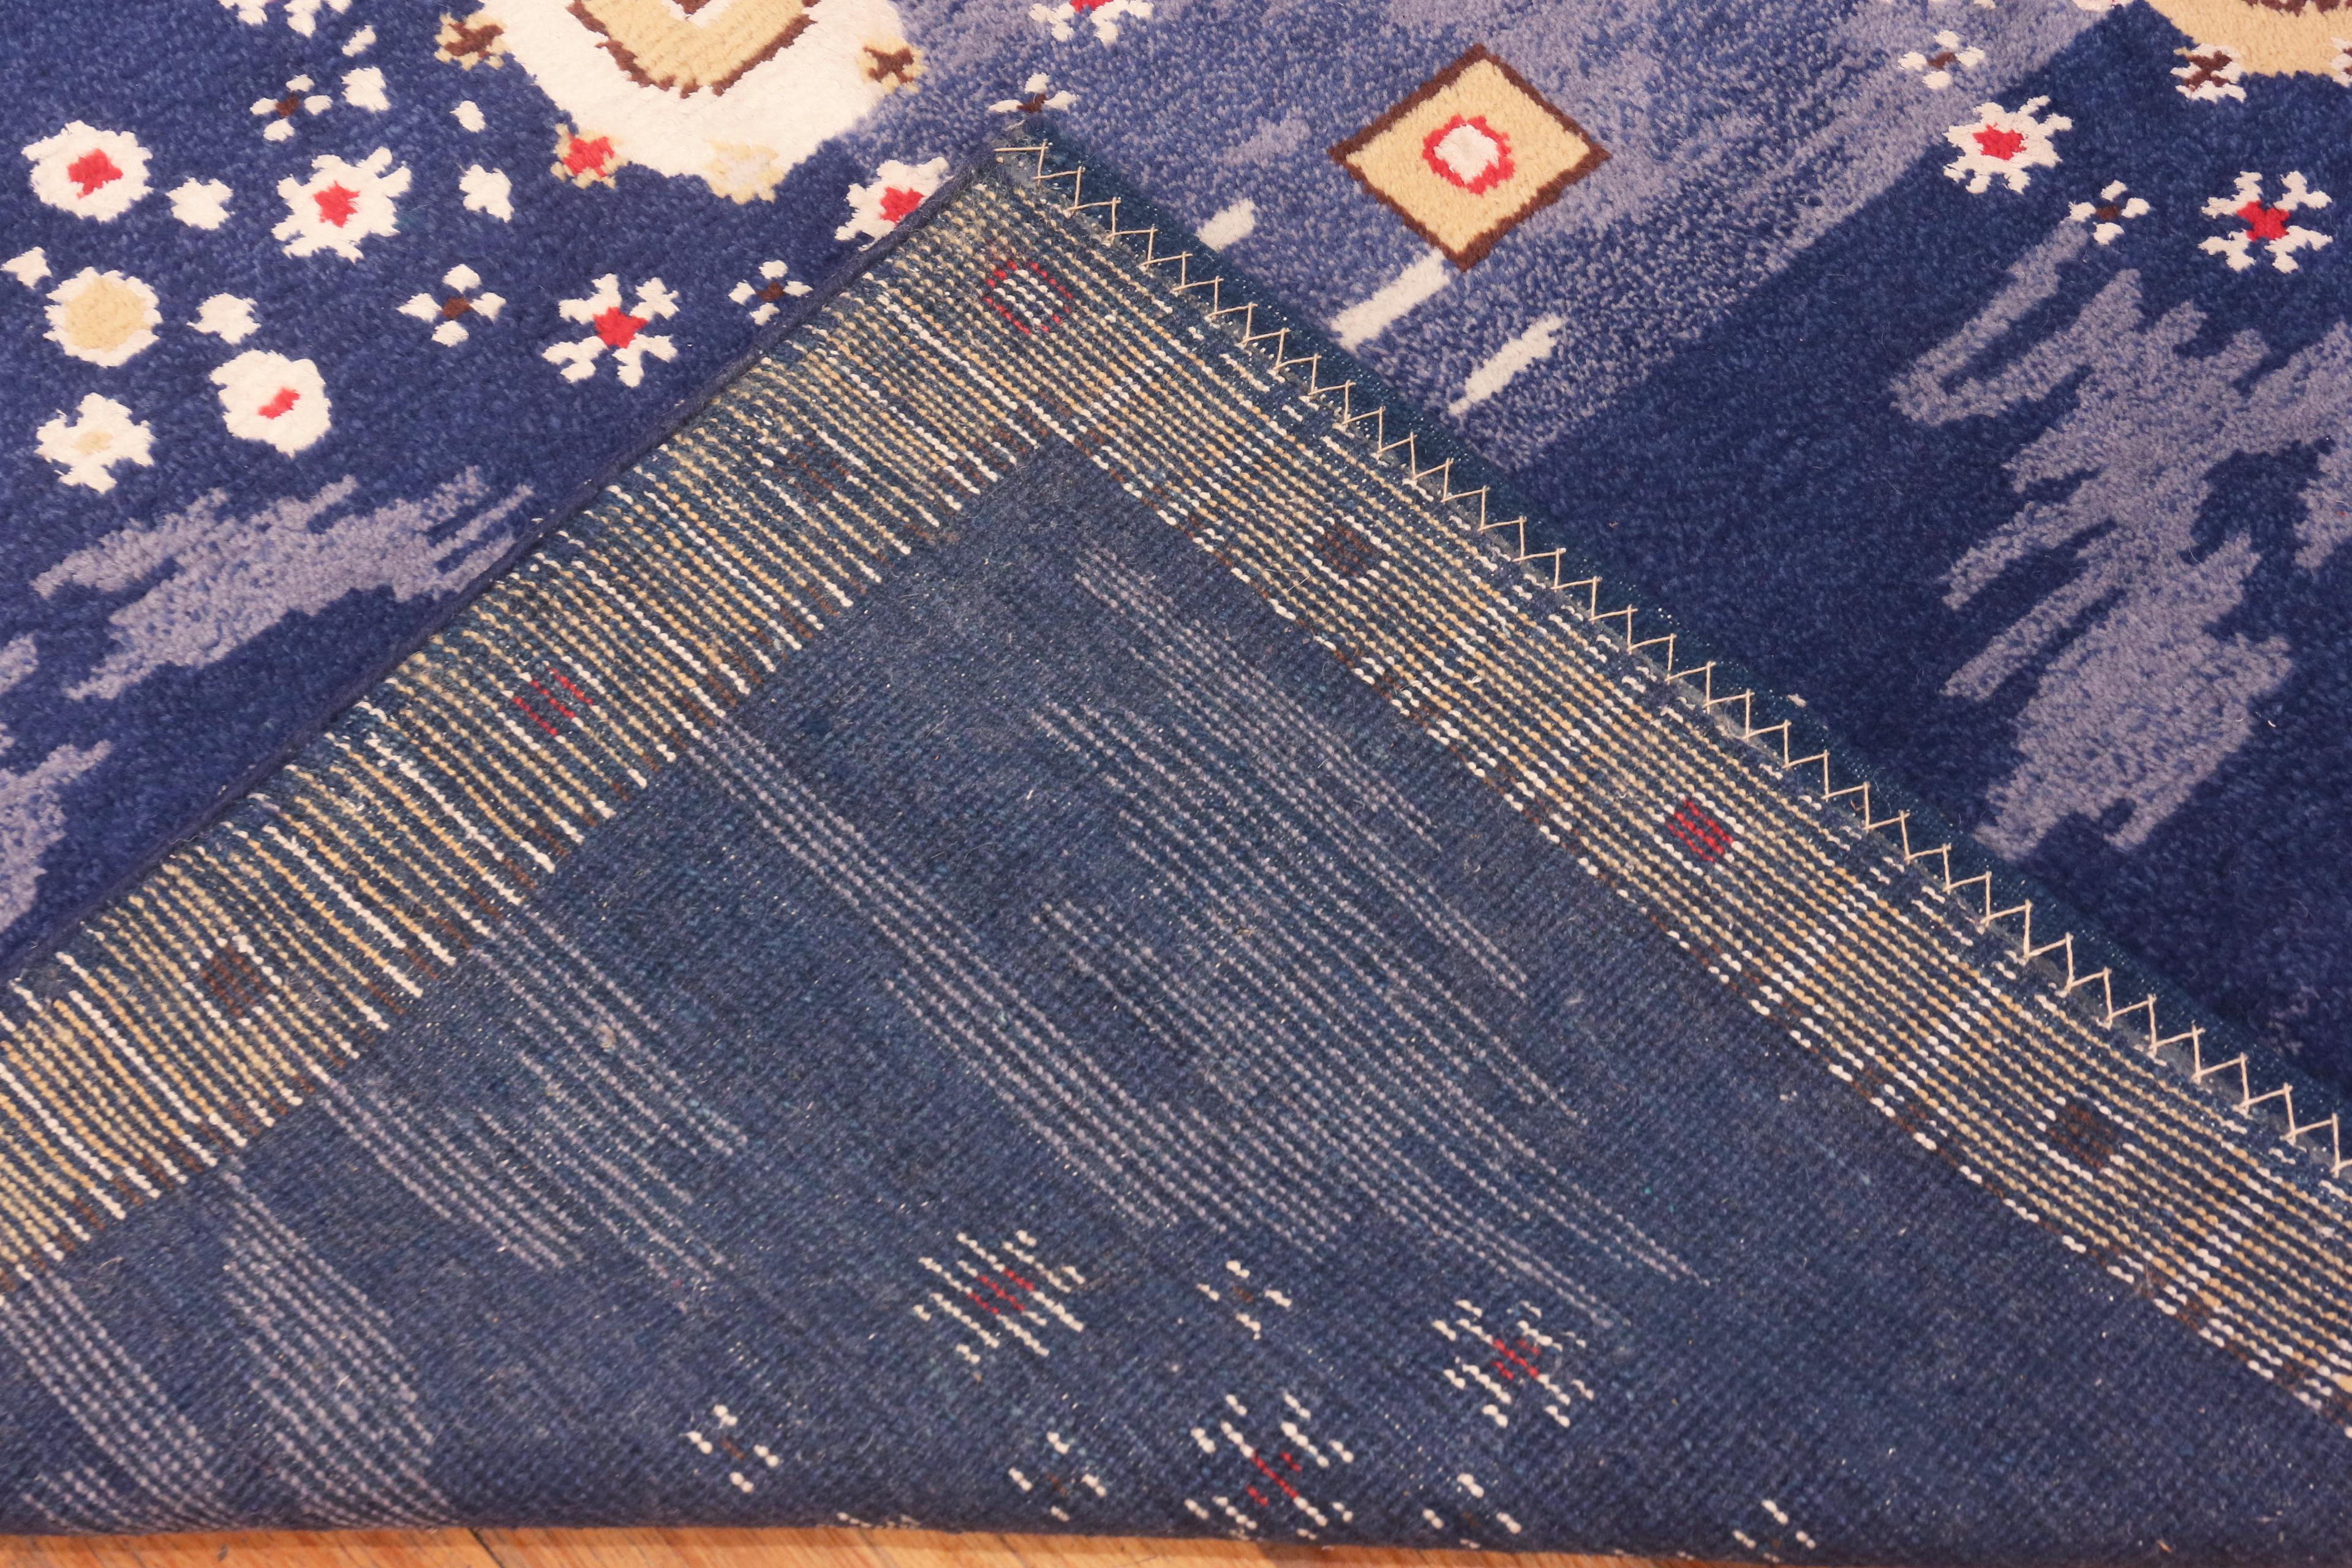 Blue Stunning Modern Silk And Wool Swedish Inspired Rug, Country of Origin: India. Circa date: Modern. Size: 9 ft 2 in x 12 ft 9 in (2.79 m x 3.89 m)

